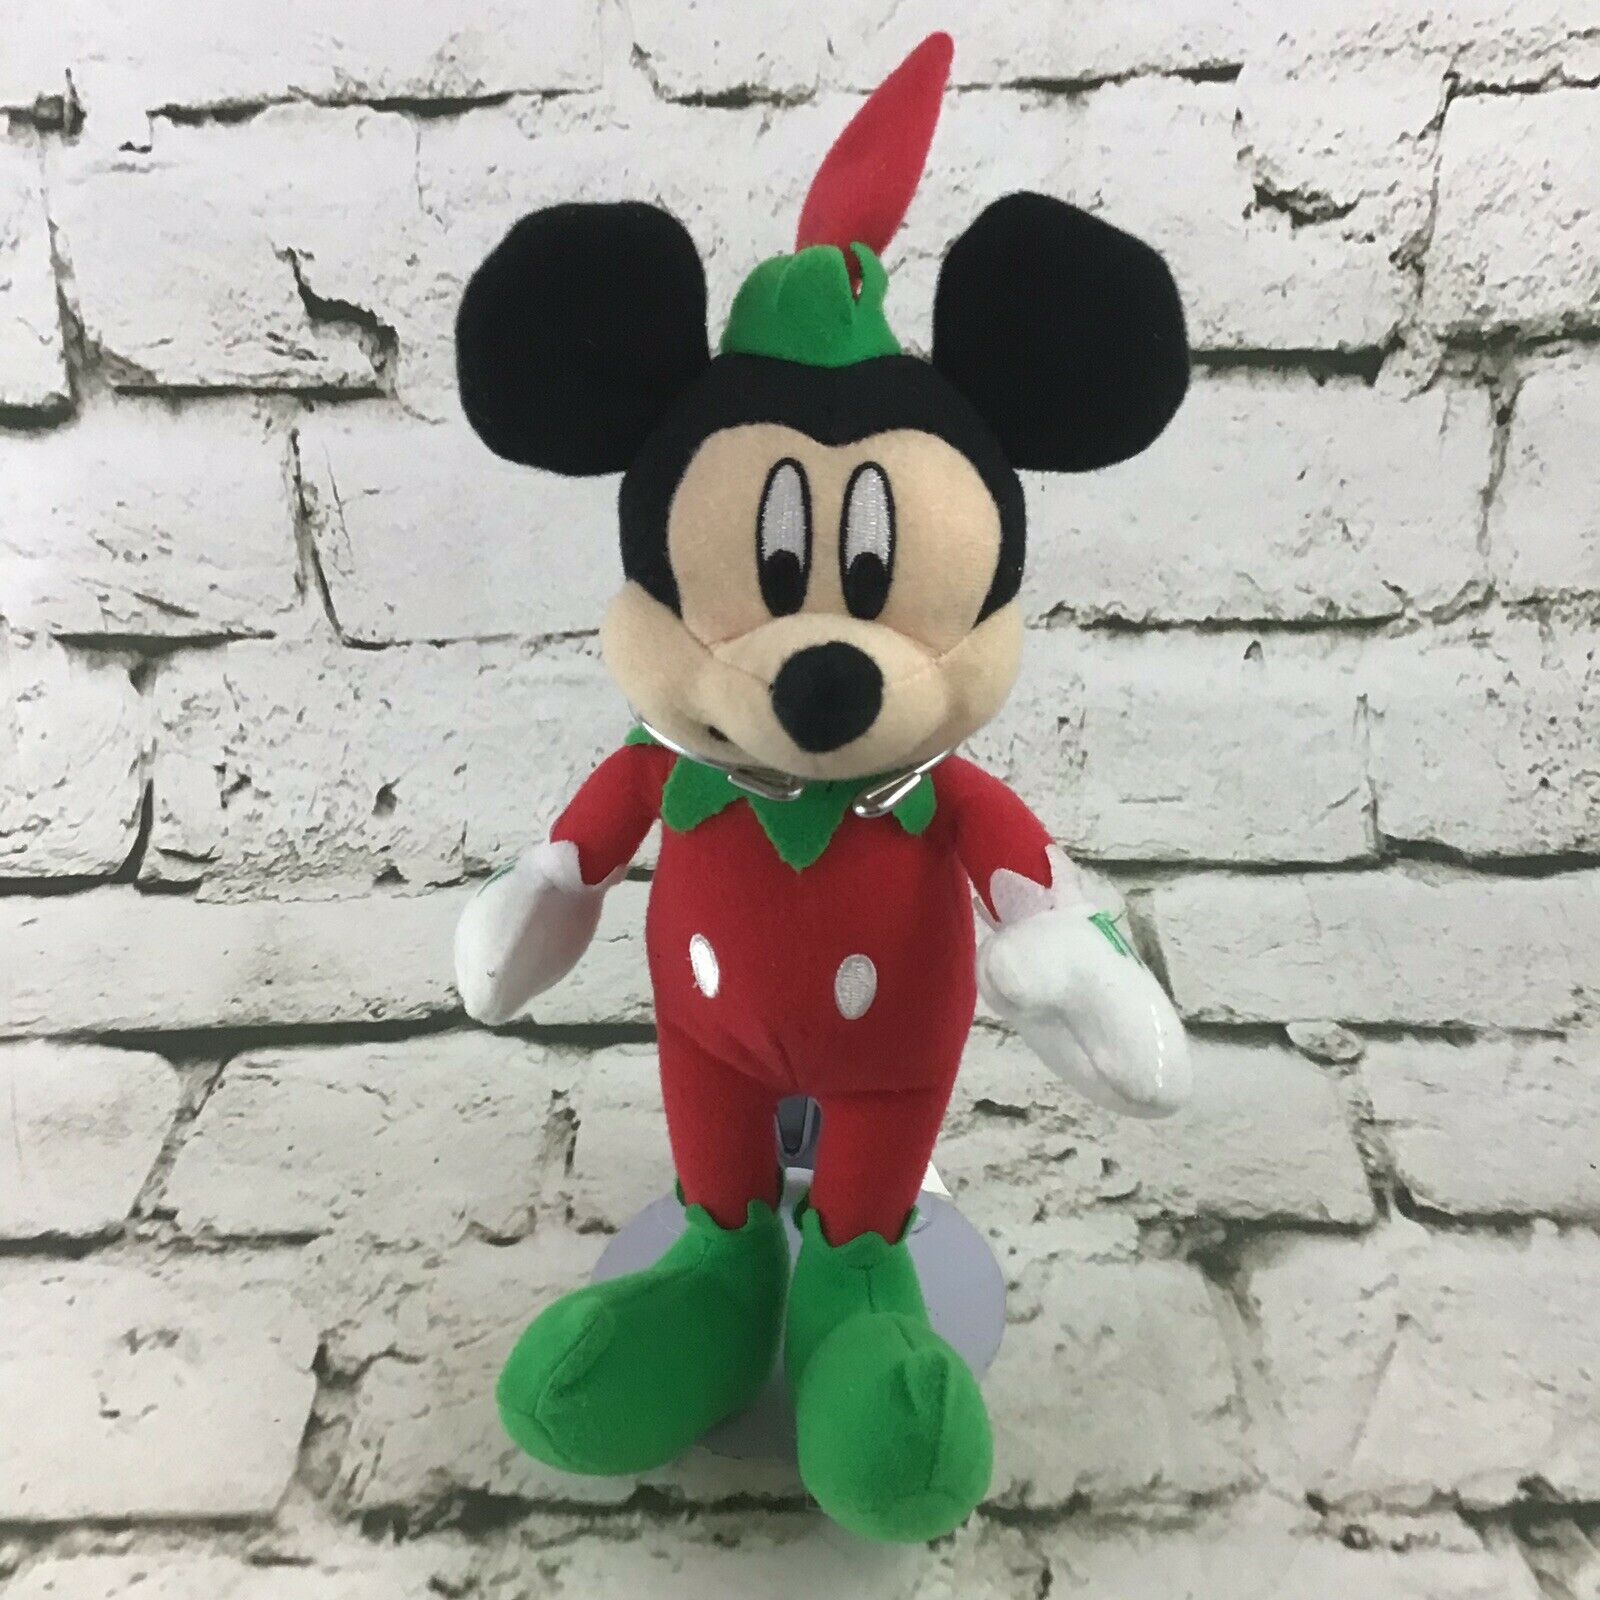 Disney Mickey Mouse Plush Toy Doll Christmas Holiday Red & Green Elf Costume